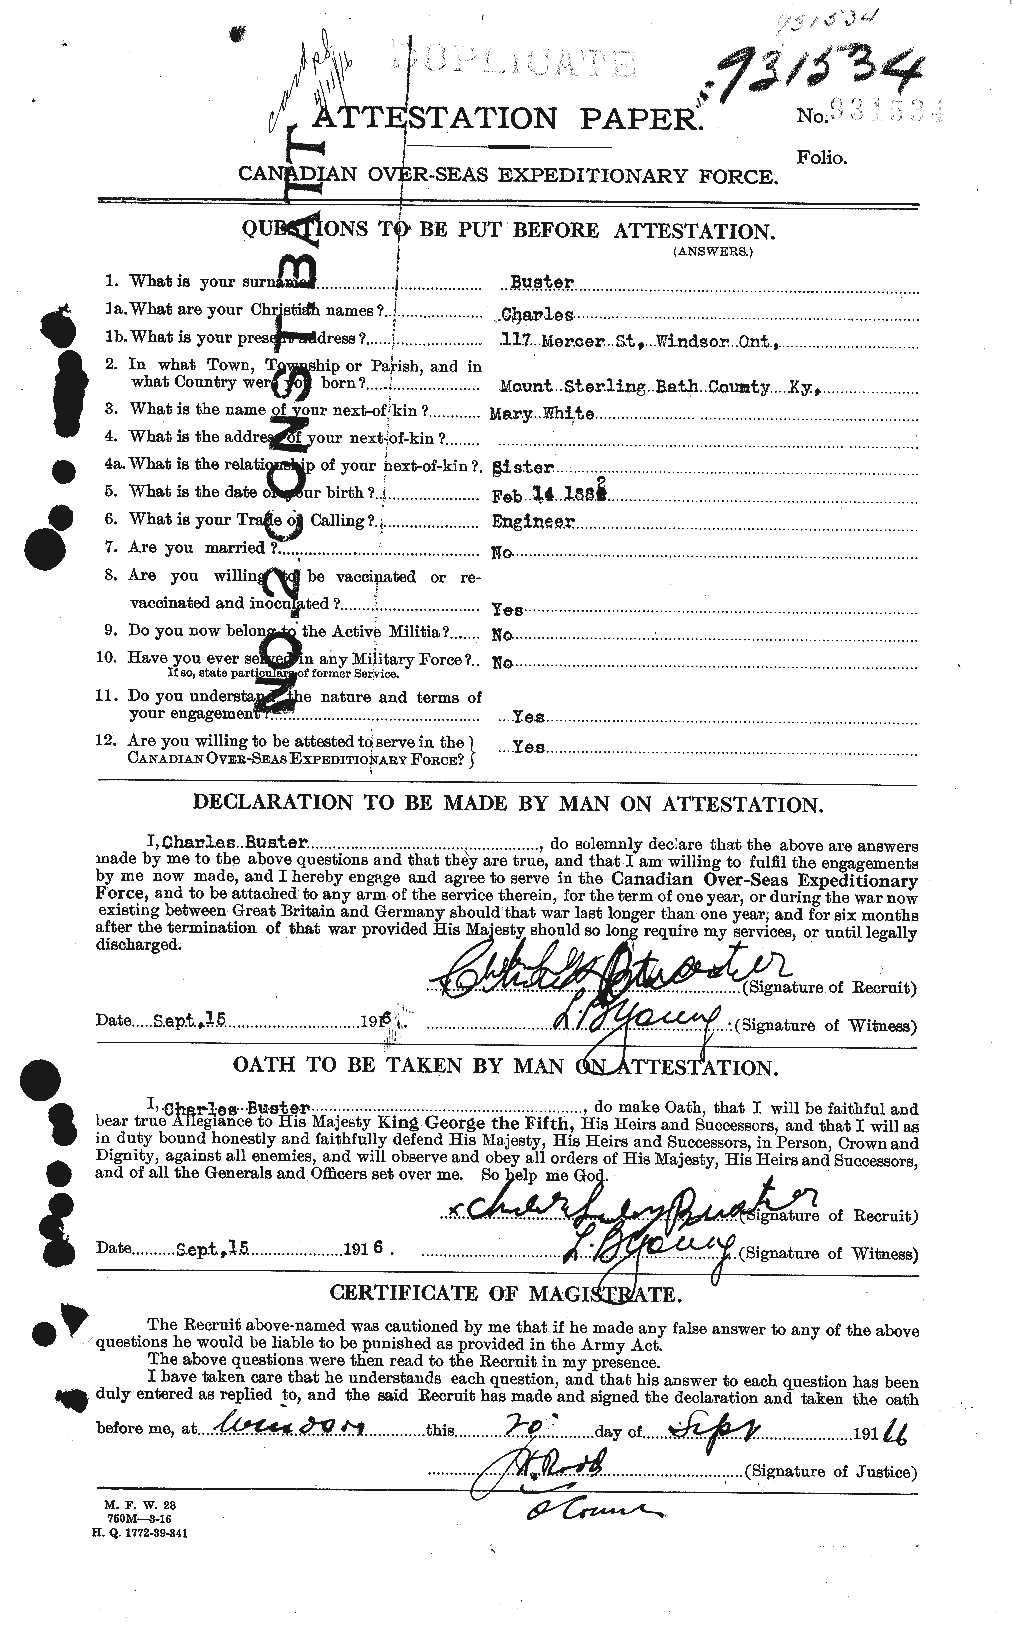 Personnel Records of the First World War - CEF 274659a